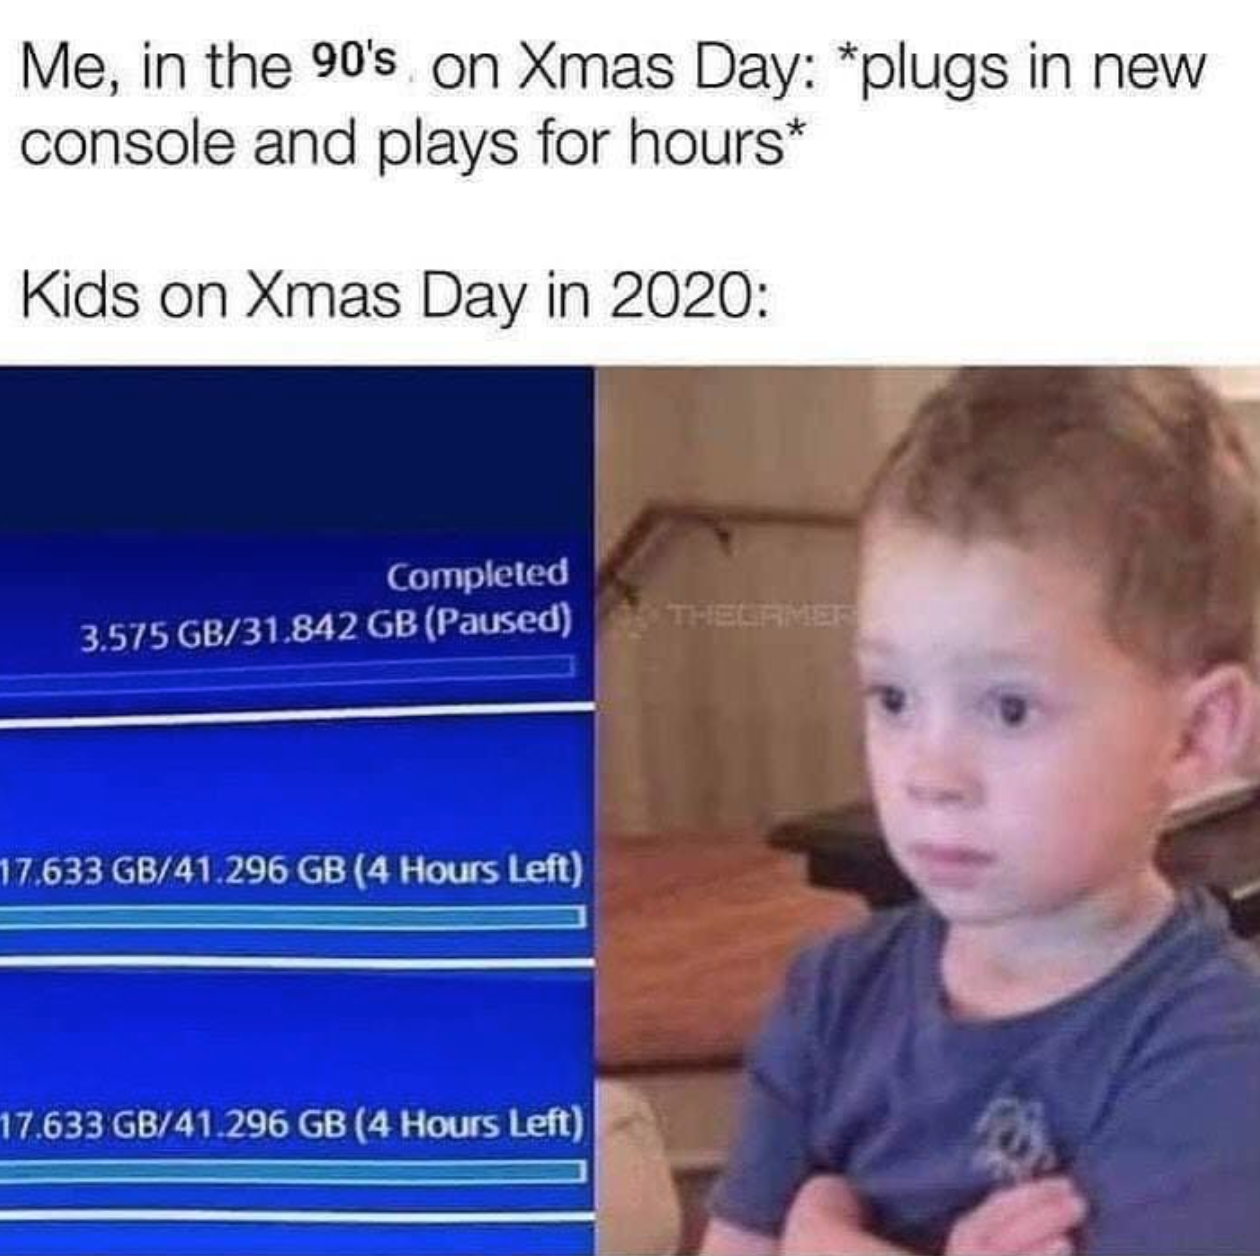 gavin kid meme - Me, in the 90's on Xmas Day plugs in new console and plays for hours Kids on Xmas Day in 2020 Completed 3.575 Gb31.842 Gb Paused 17.633 Gb41.296 Gb 4 Hours Left 17.633 Gb41.296 Gb 4 Hours Left